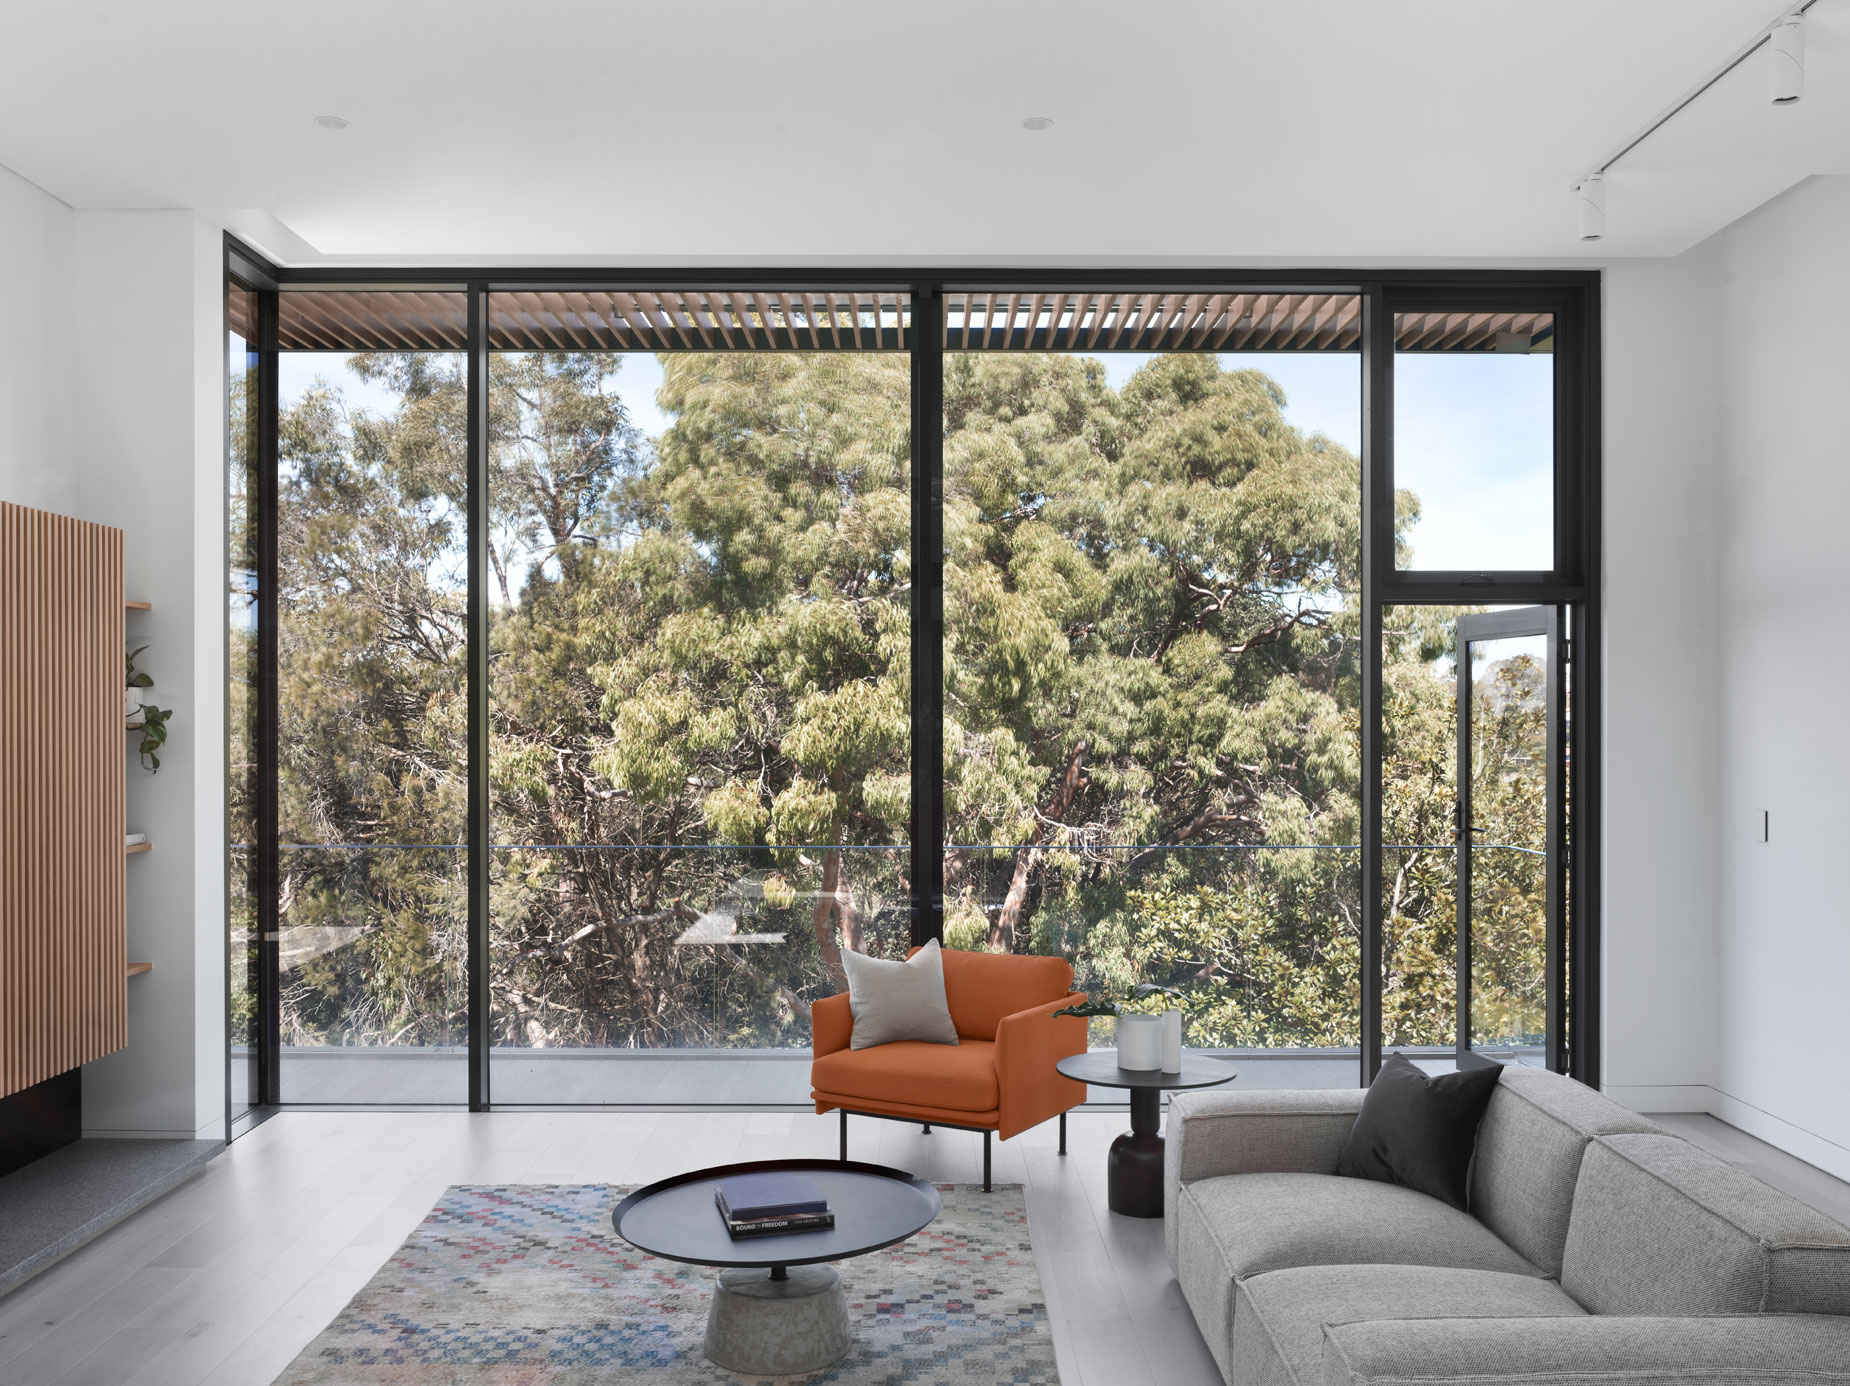 luke-butterly-2020-Cove-Cove-House-by-Dieppe-Design-Architecture-Sydney-NSW-3